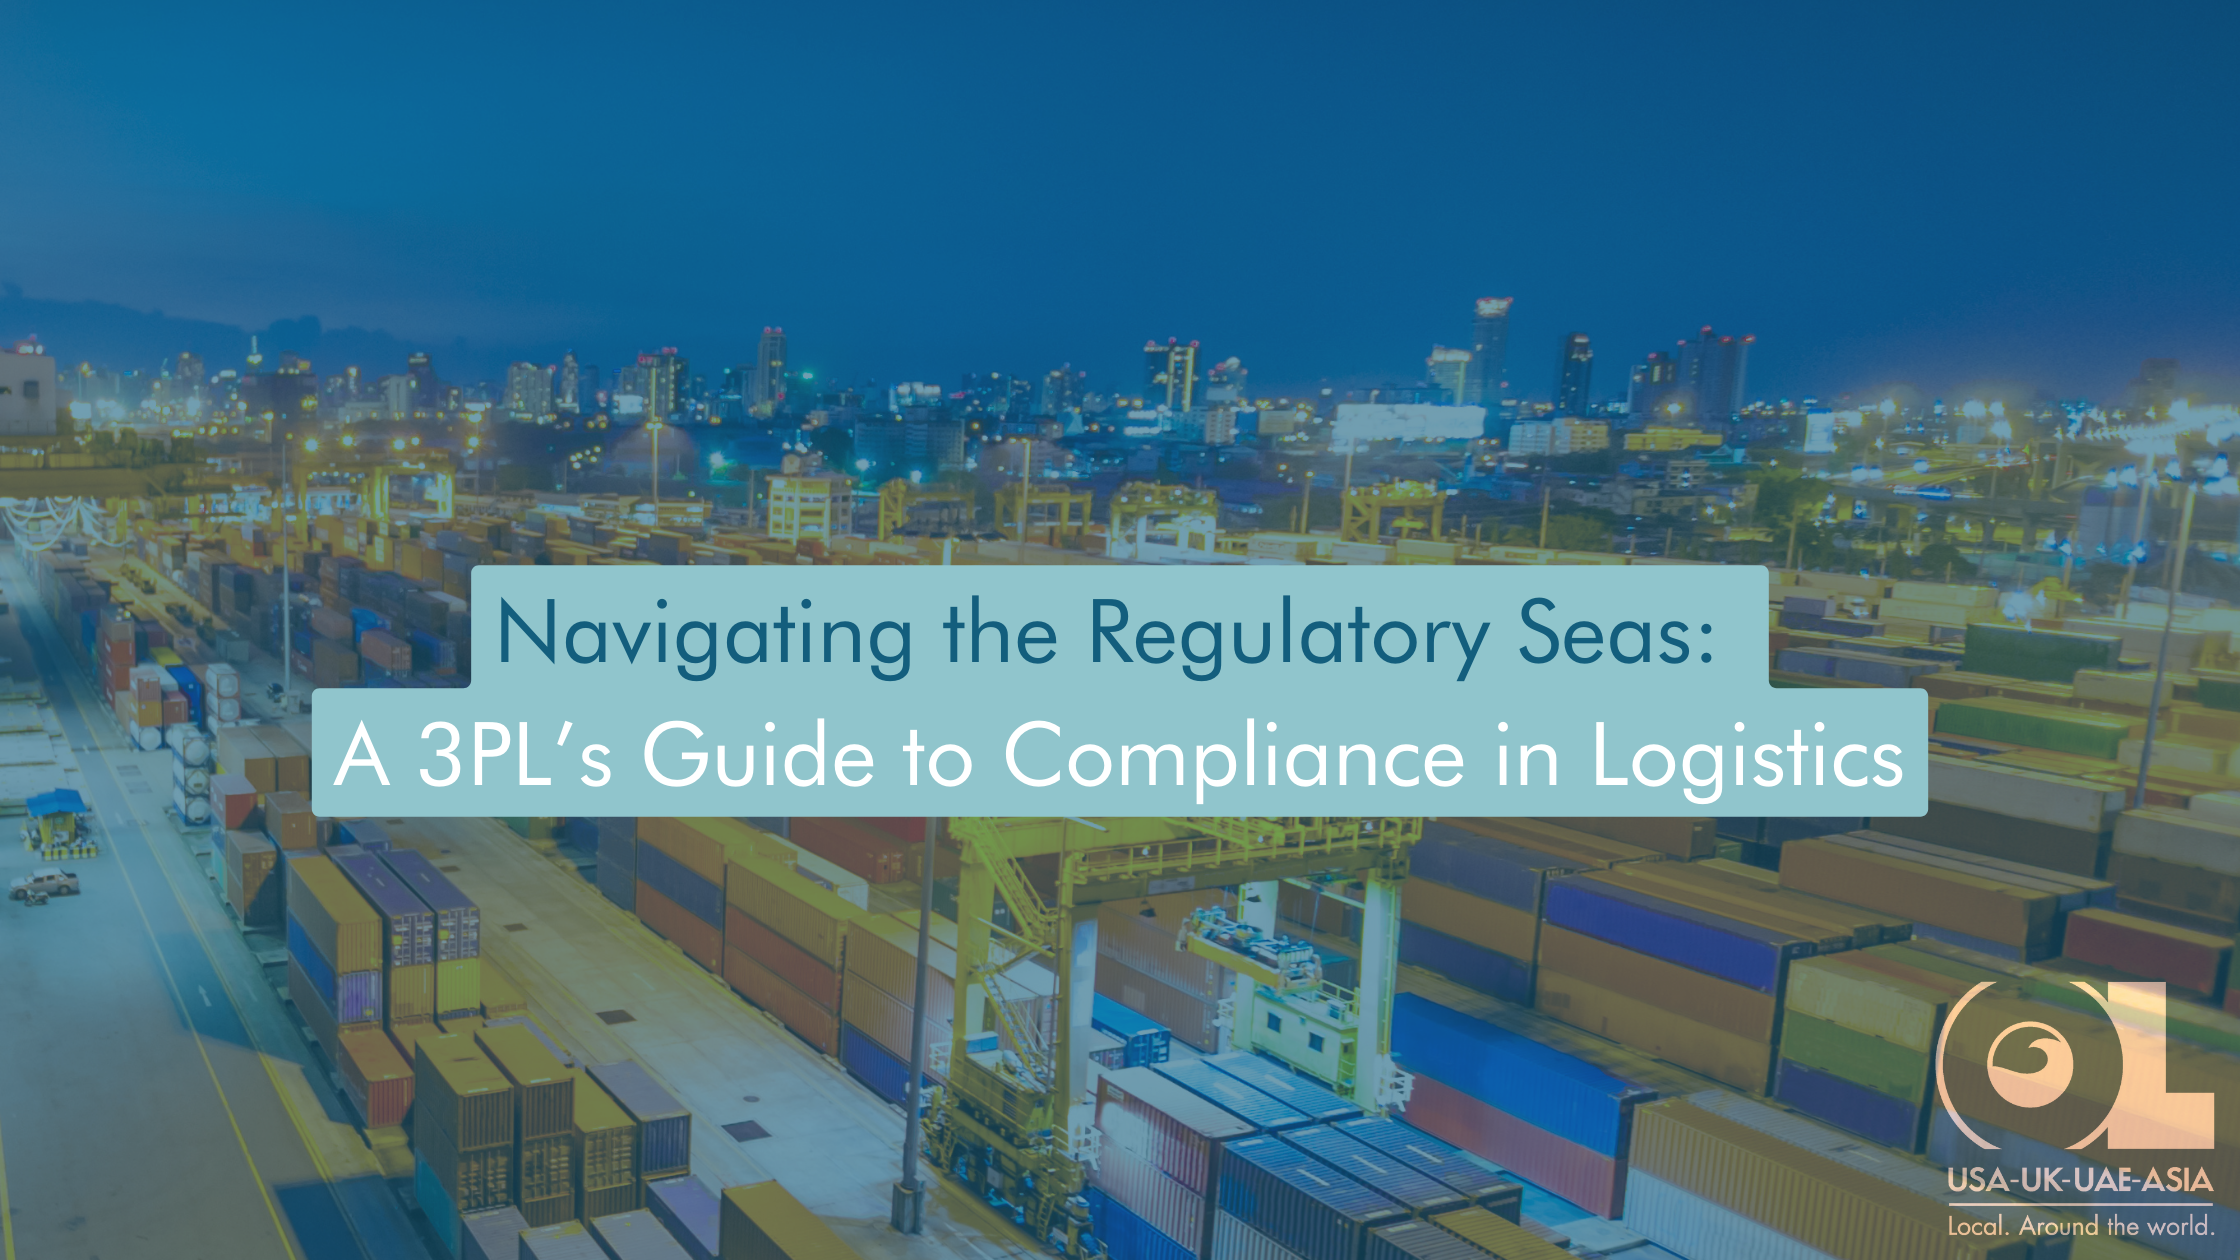 Navigating-the-Regulatory-Seas-A-3PLs-Guide-to-Compliance-in-Logistics-OL-USA